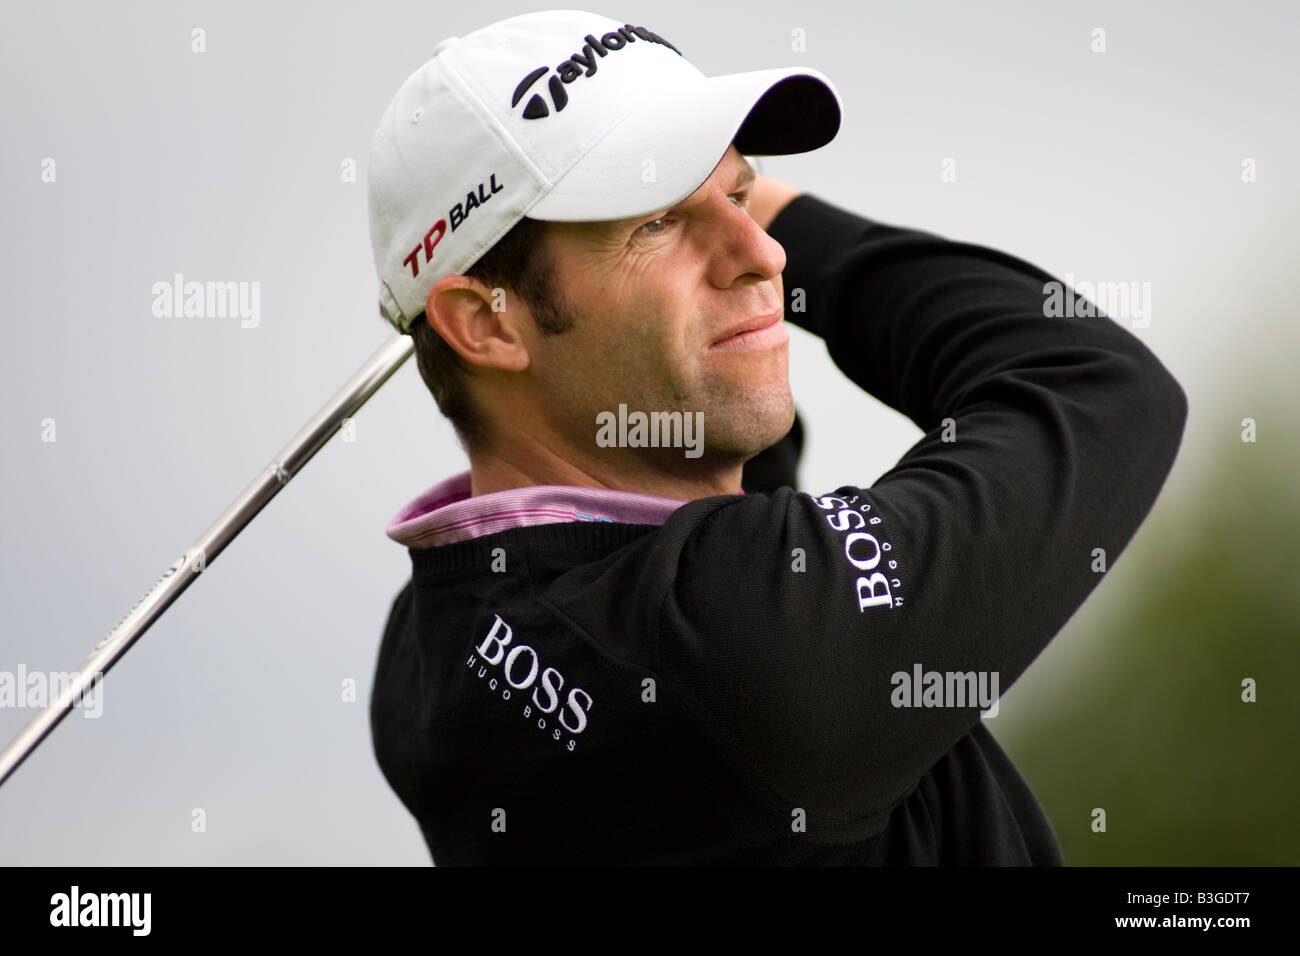 GLENEAGLES SCOTLAND AUGUST 29 Bradley Dredge from Wales competing in the Johnnie Walker Classic PGA European Tour golf tourname Stock Photo